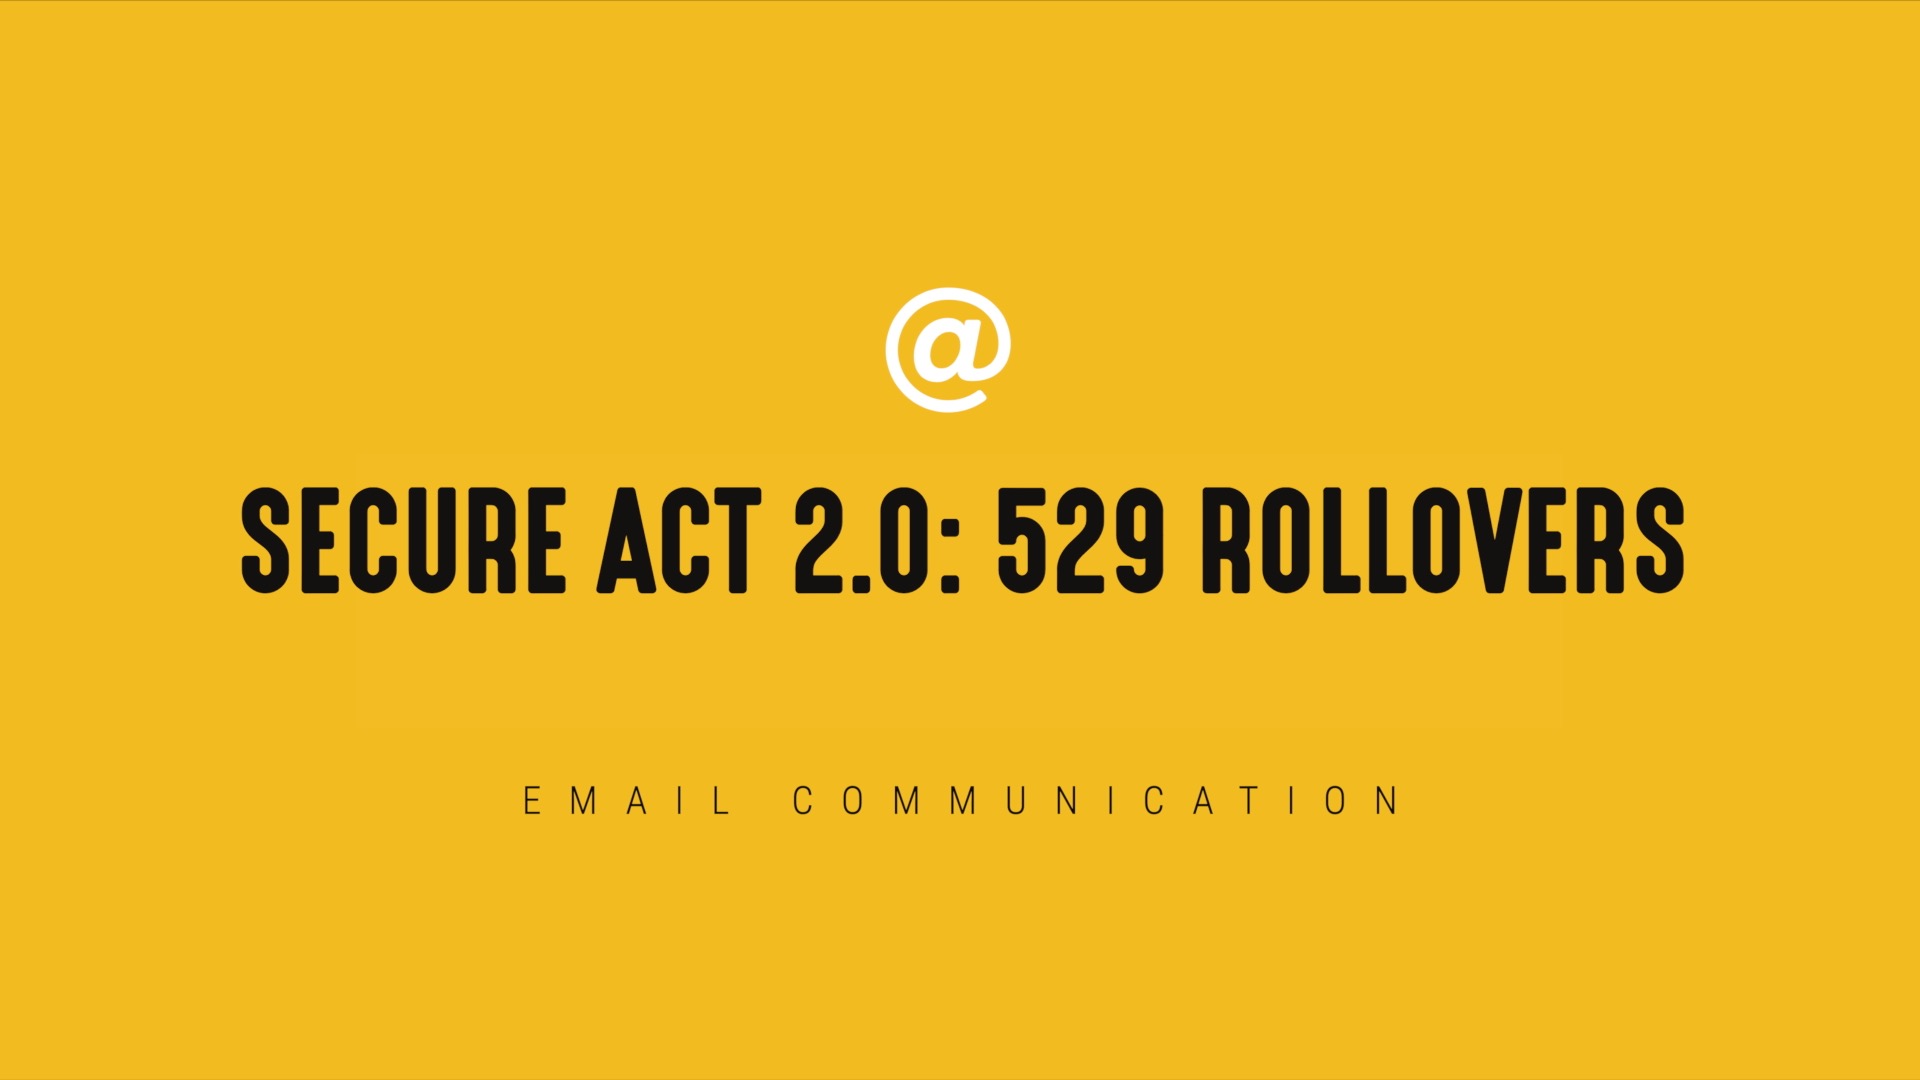 [NEW] SECURE Act 2.0: 529 Rollovers Email